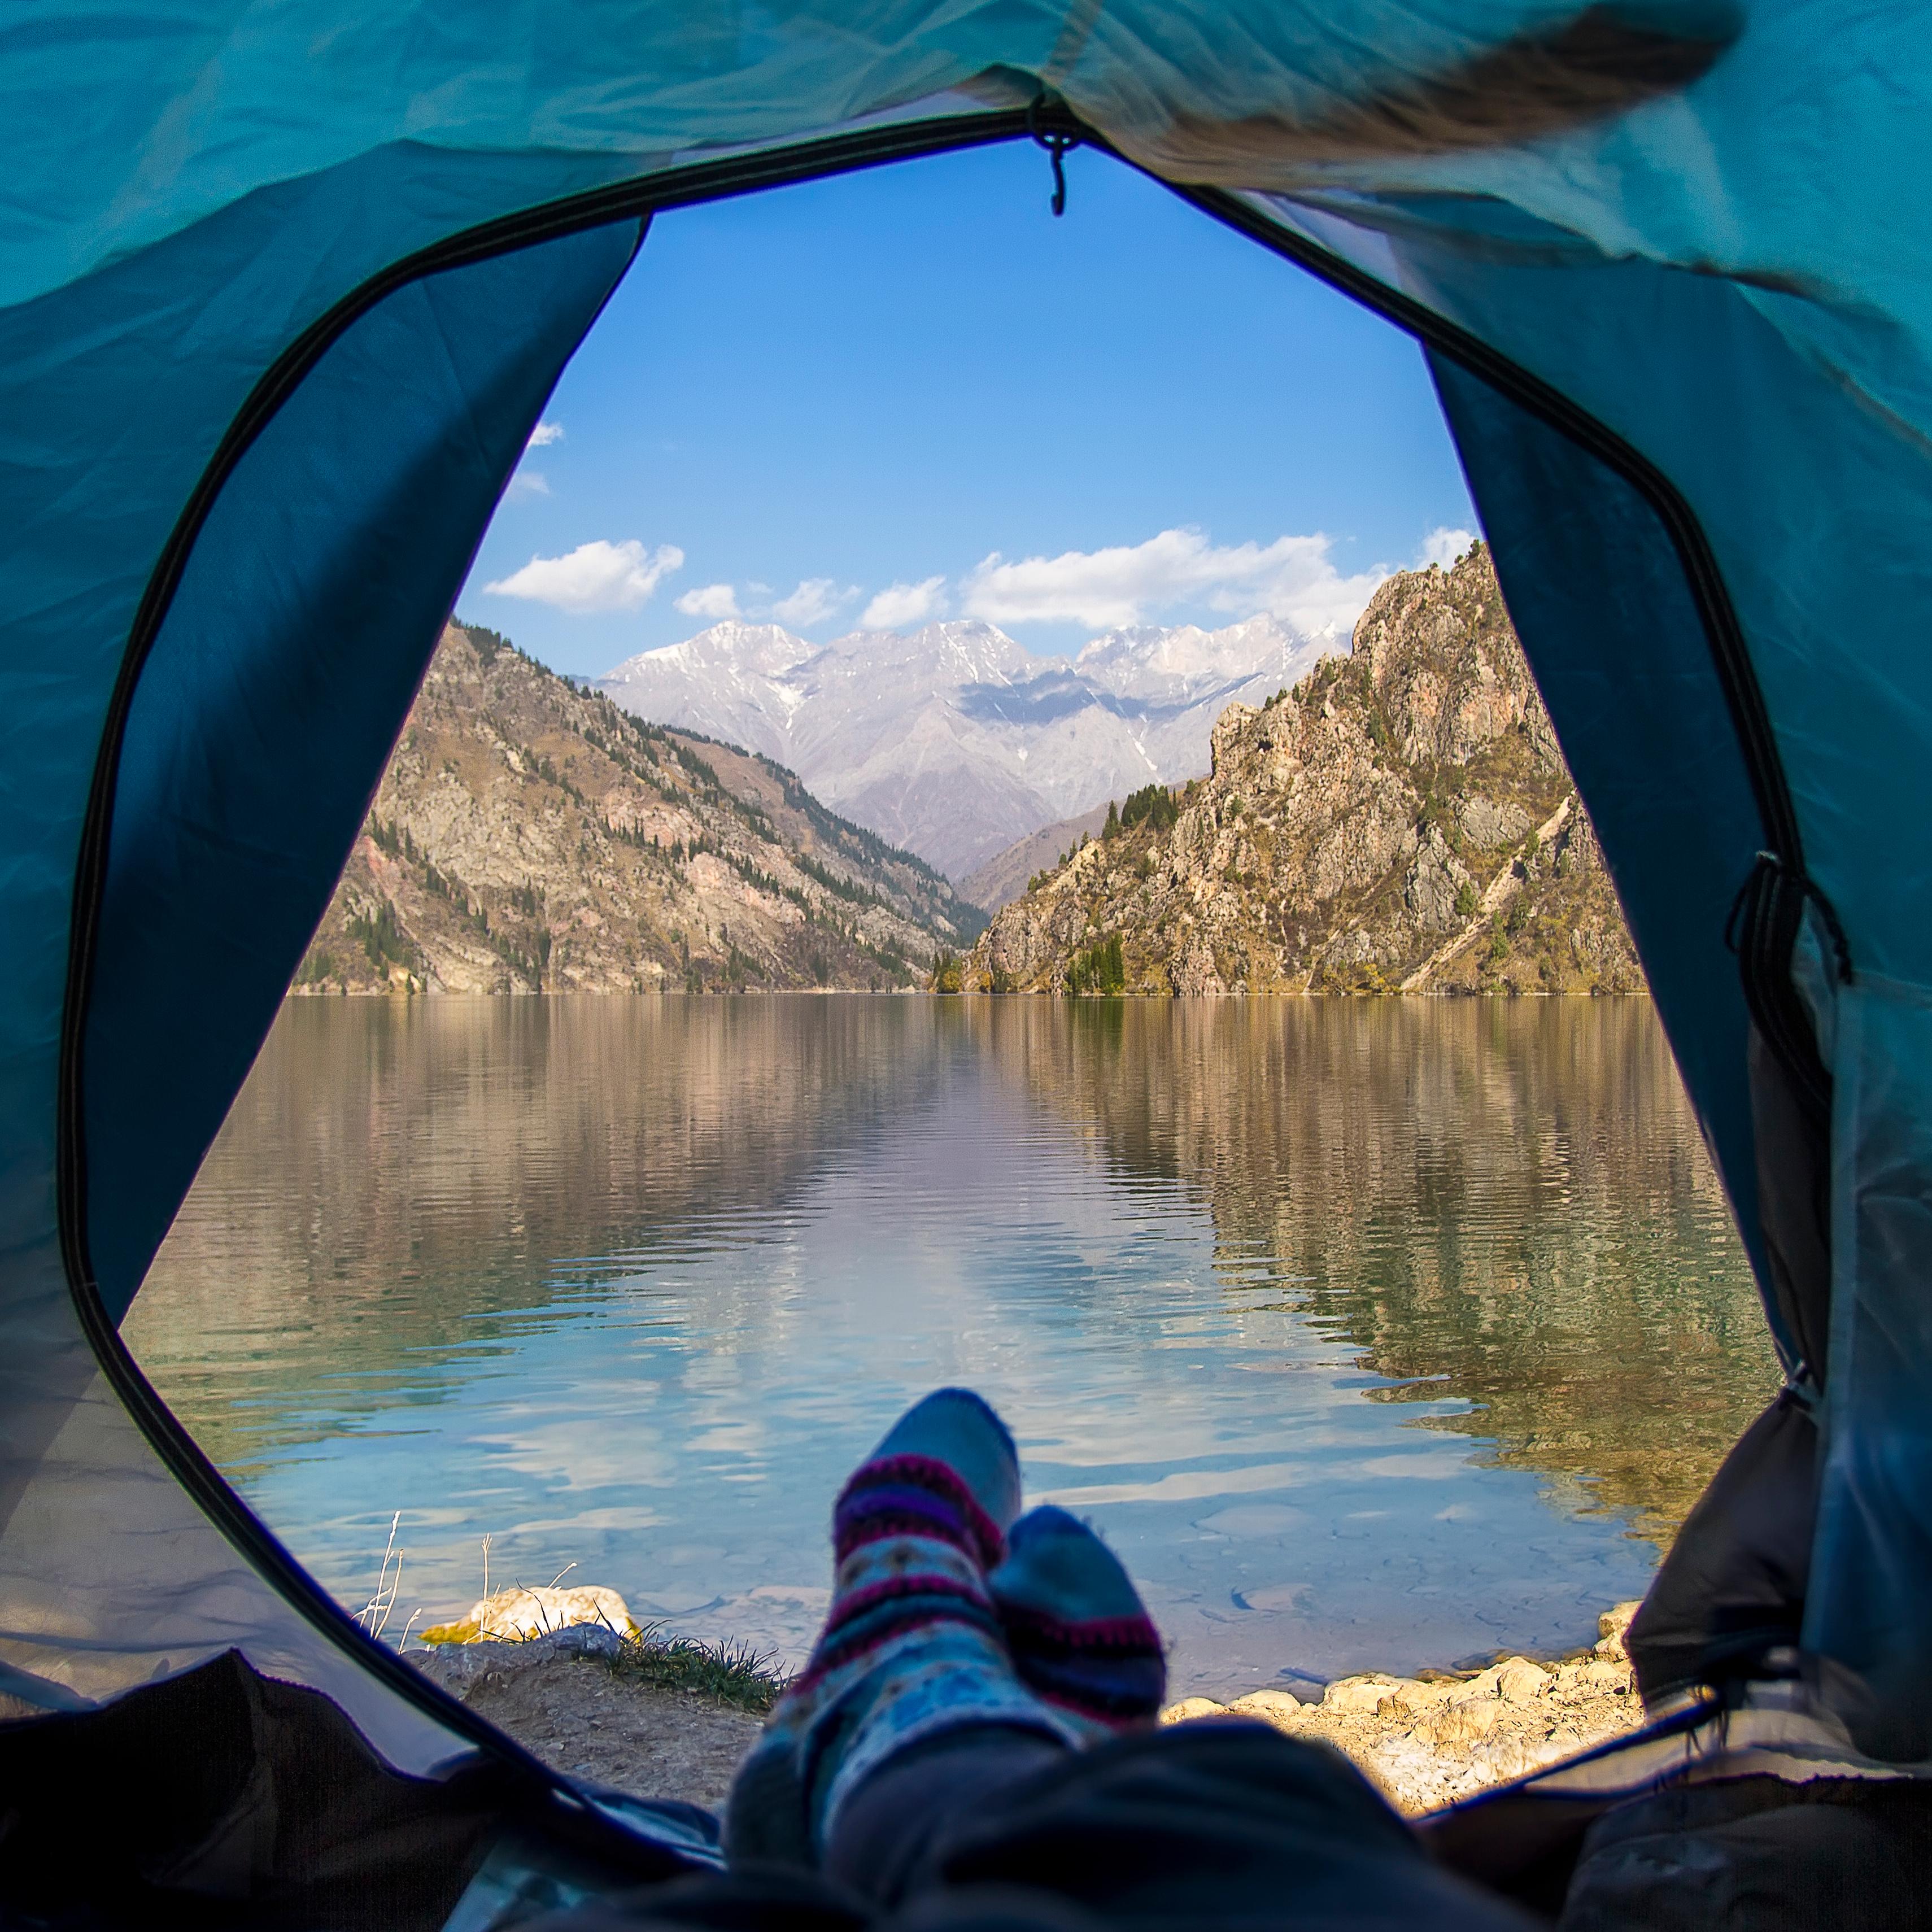 A stunning place to pitch your tent for the night! © Roman Maximus / Shutterstock